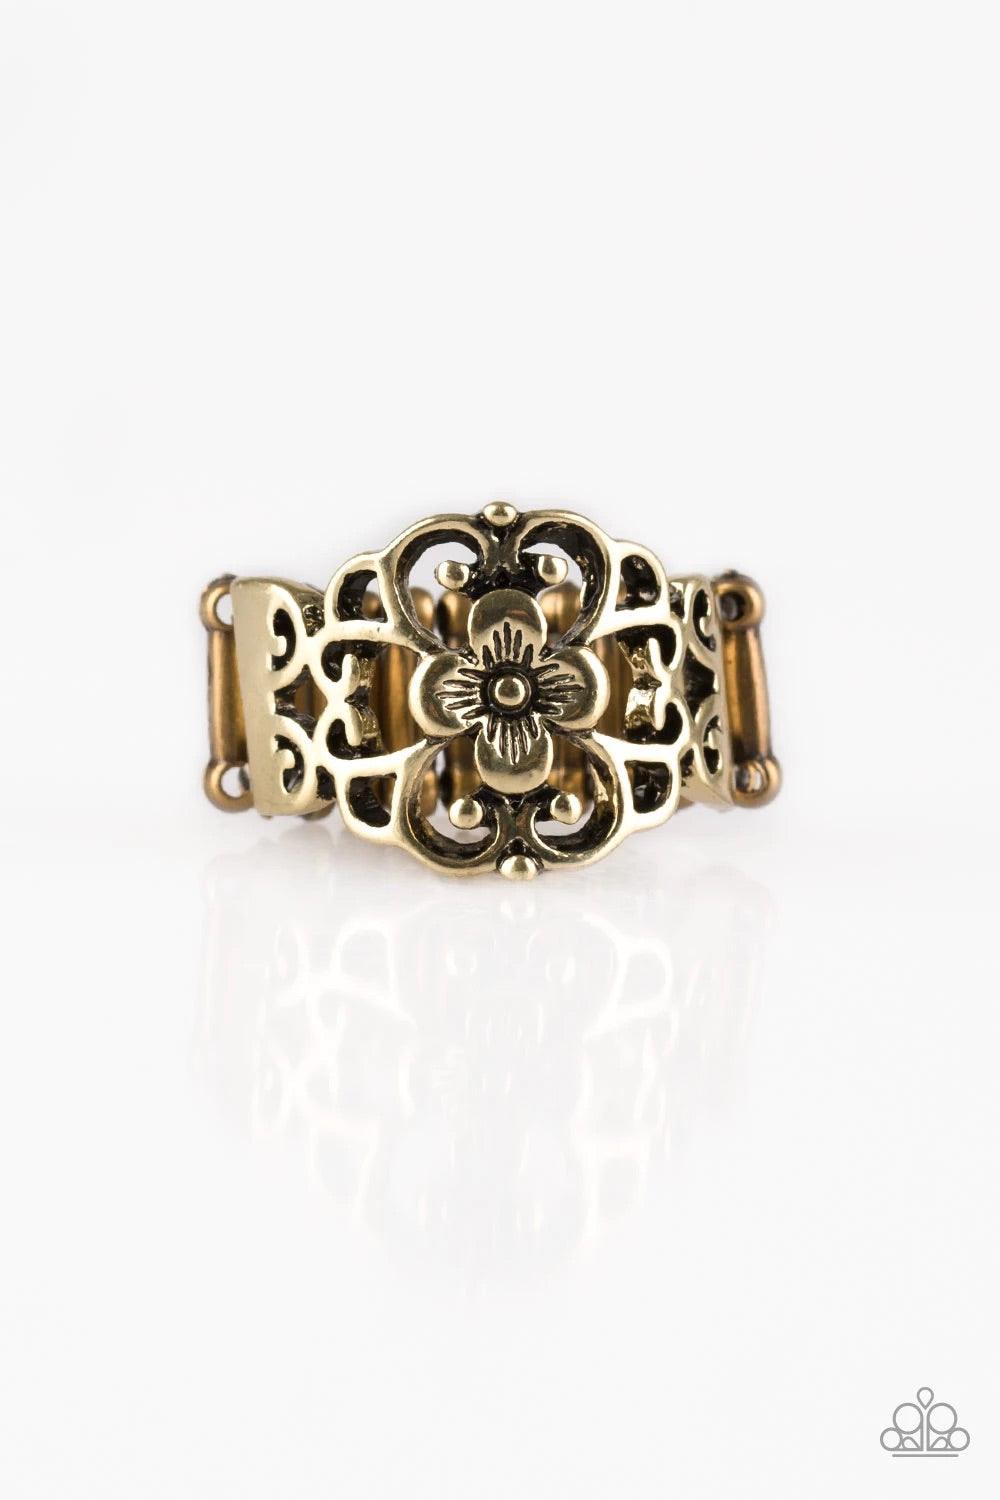 Paparazzi Accessories Fanciful Flower Gardens ~Brass Glistening brass filigree blooms from a shimmery floral center, creating a whimsical band across the finger. Features a stretchy band for a flexible fit. Sold as one individual ring. Jewelry